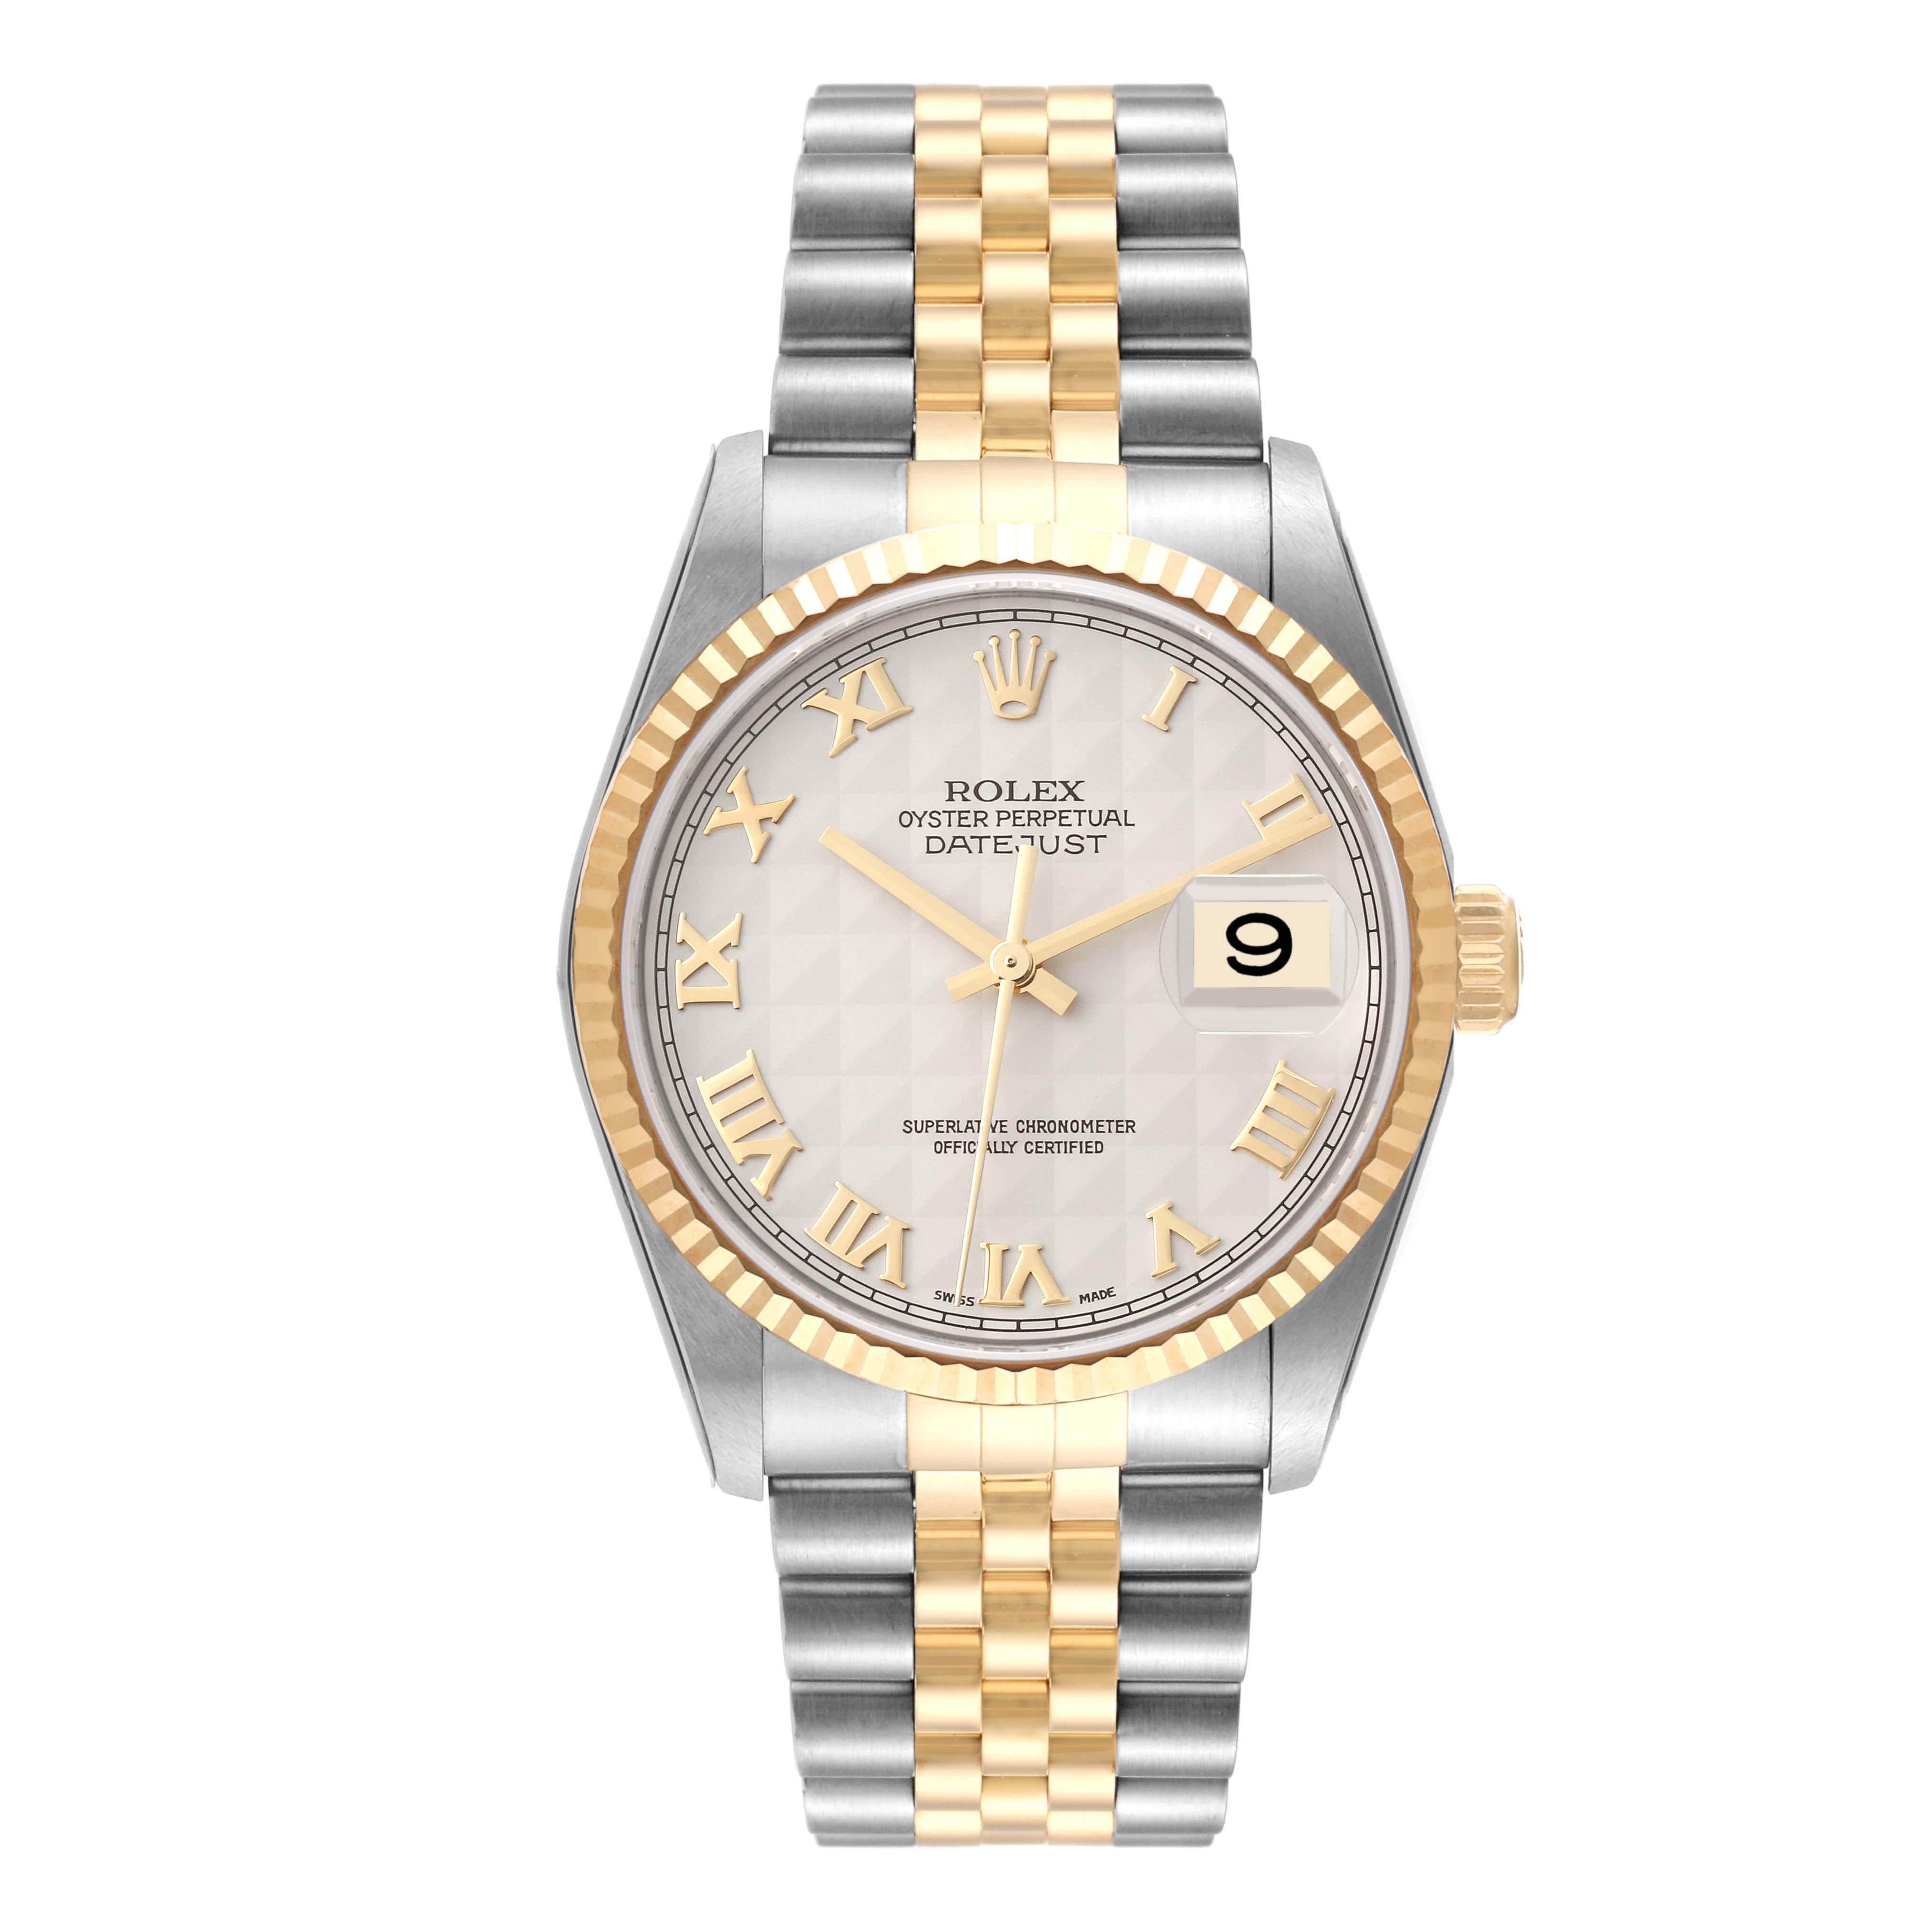 Rolex Datejust Steel Yellow Gold Ivory Pyramid Dial Mens Watch 16233 Unworn NOS. Officially certified chronometer automatic self-winding movement. Stainless steel case 36 mm in diameter.  Rolex logo on an 18K yellow gold crown. 18k yellow gold